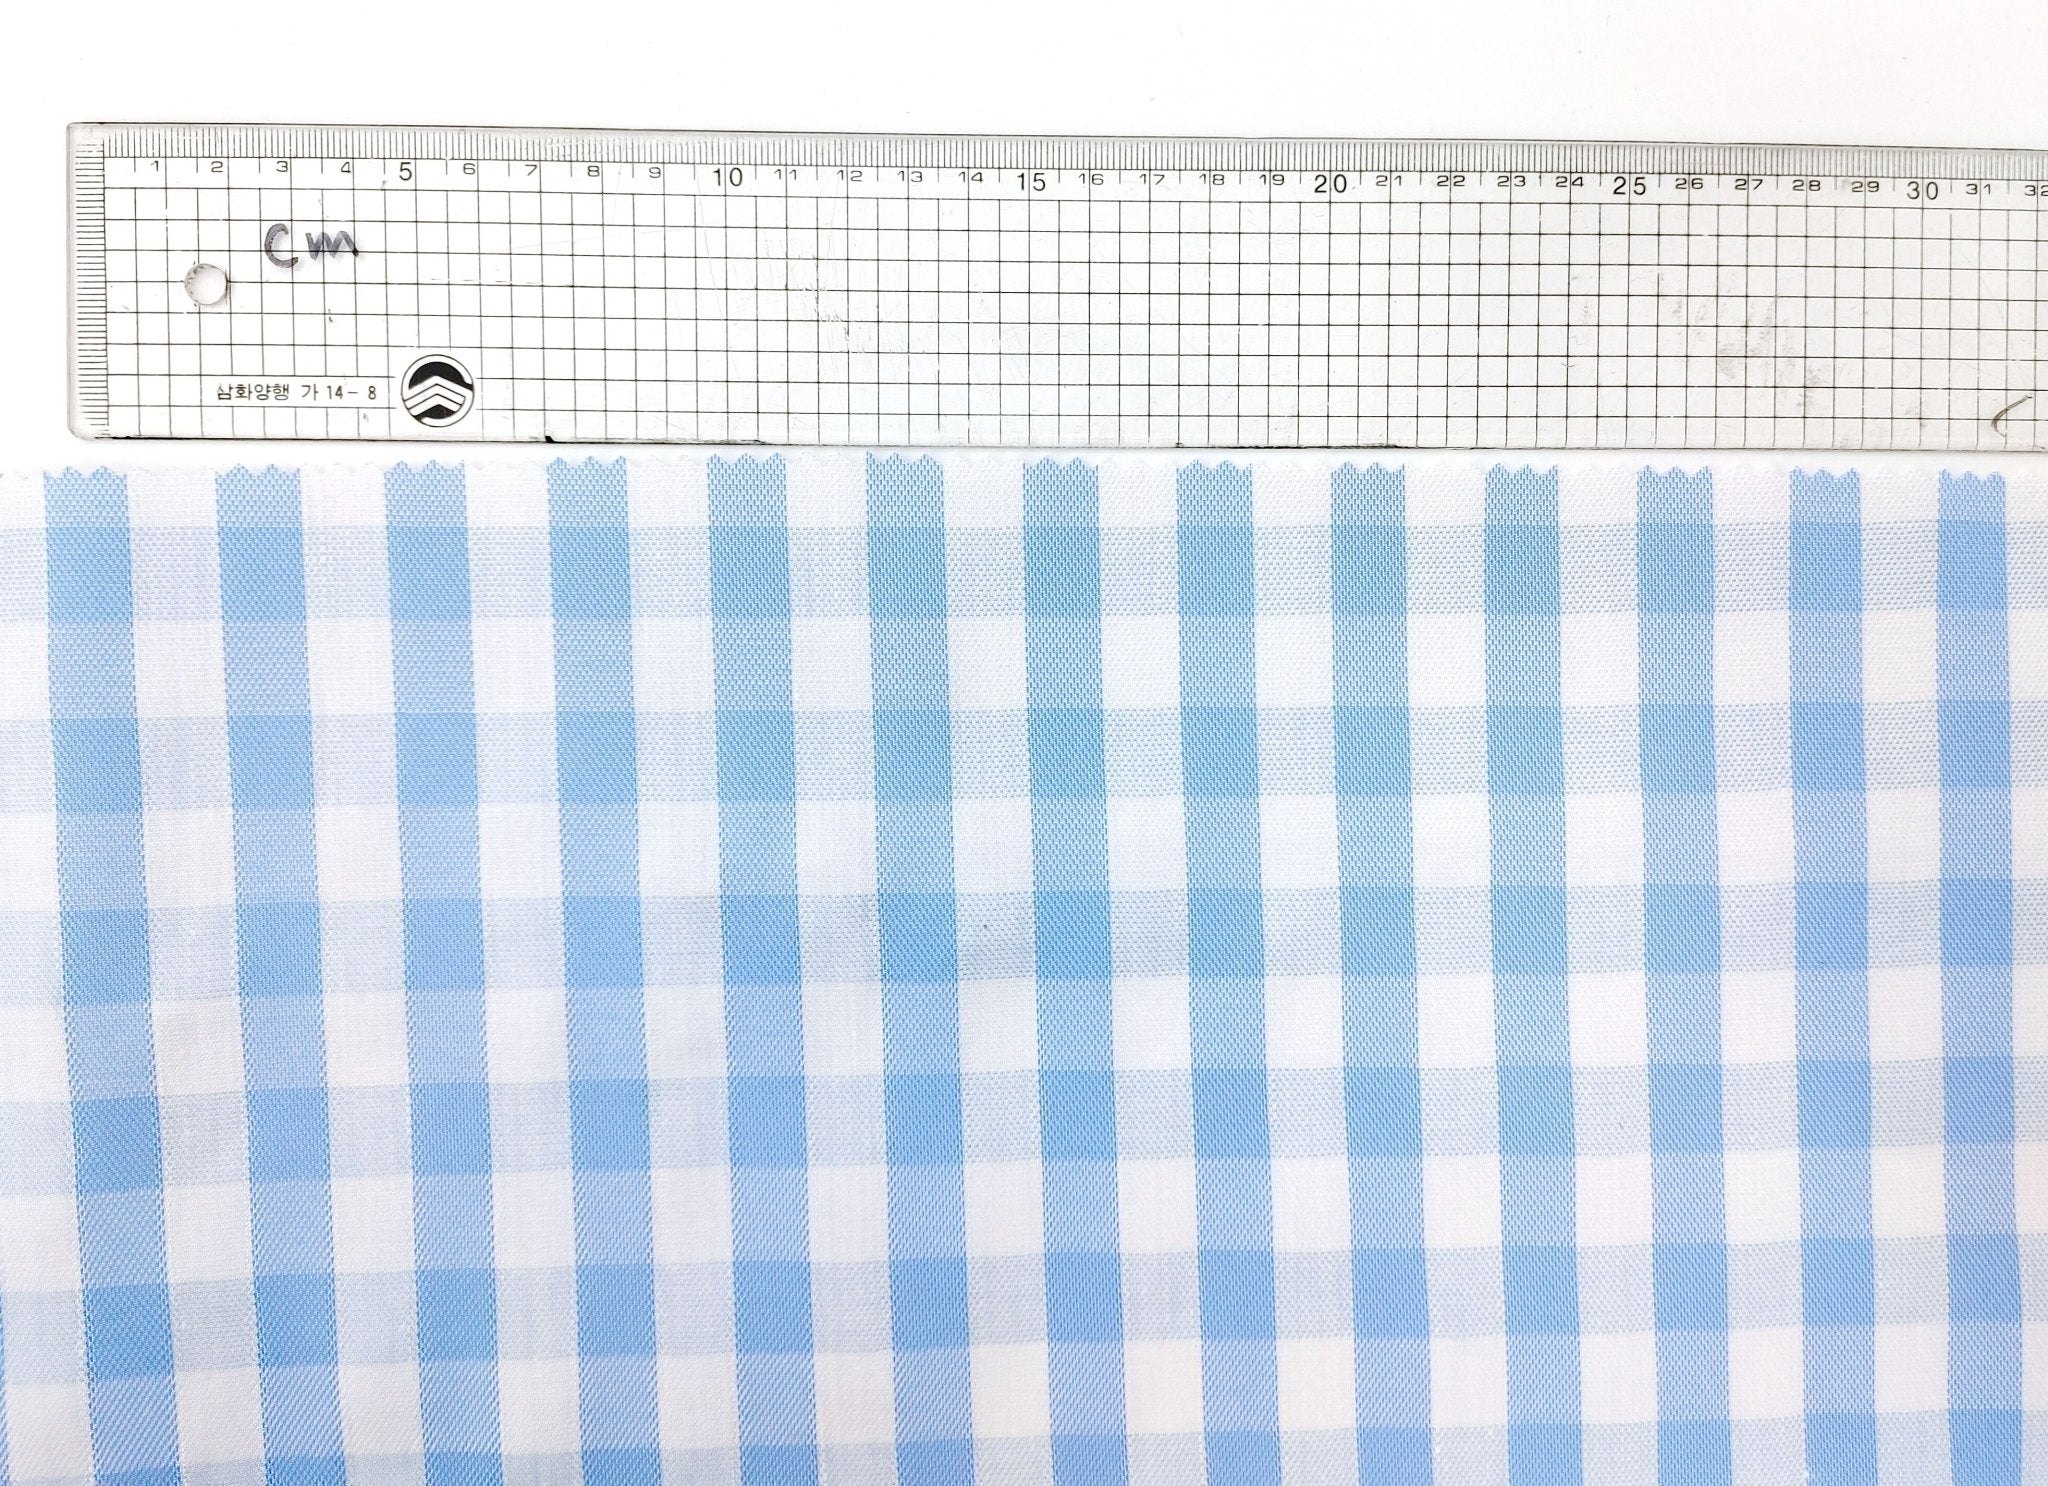 Linen Twill Stretch Fabric with Gingham Check - Medium Weight 7633 7634 - The Linen Lab - Blue